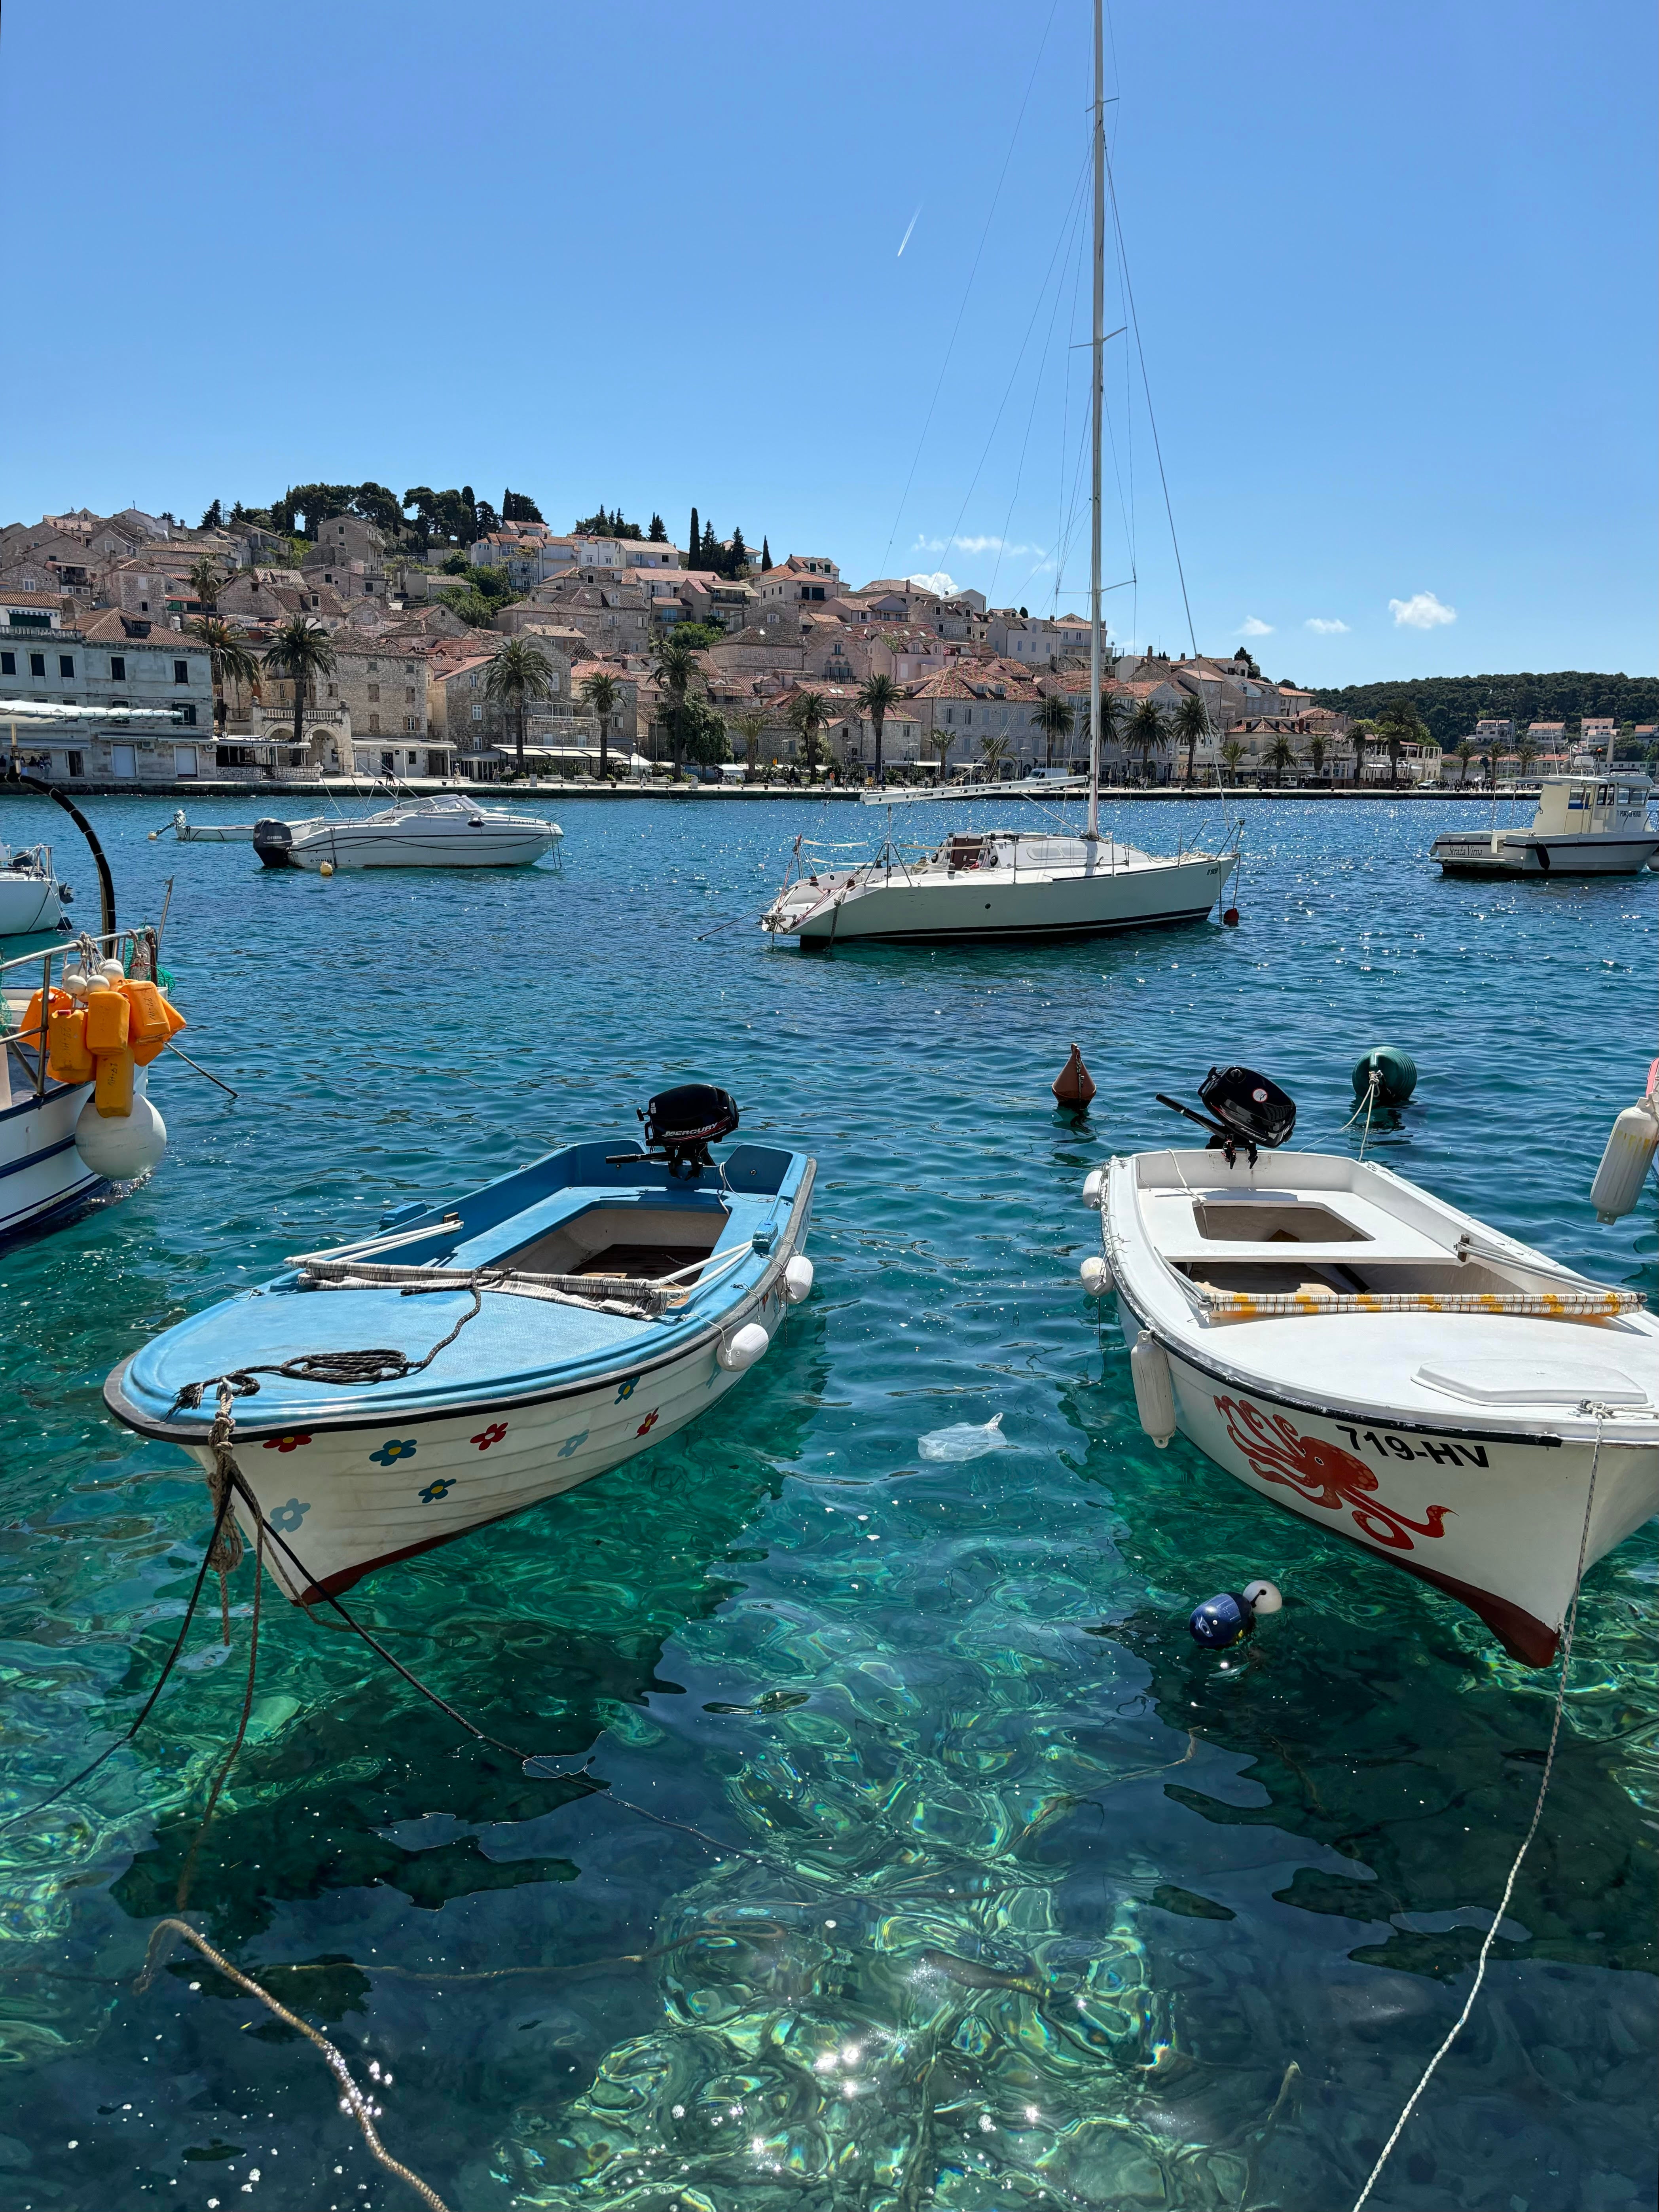 Charming scenes of boats bobbing in tranquil blue waters await visitors to Hvar’s waterfront